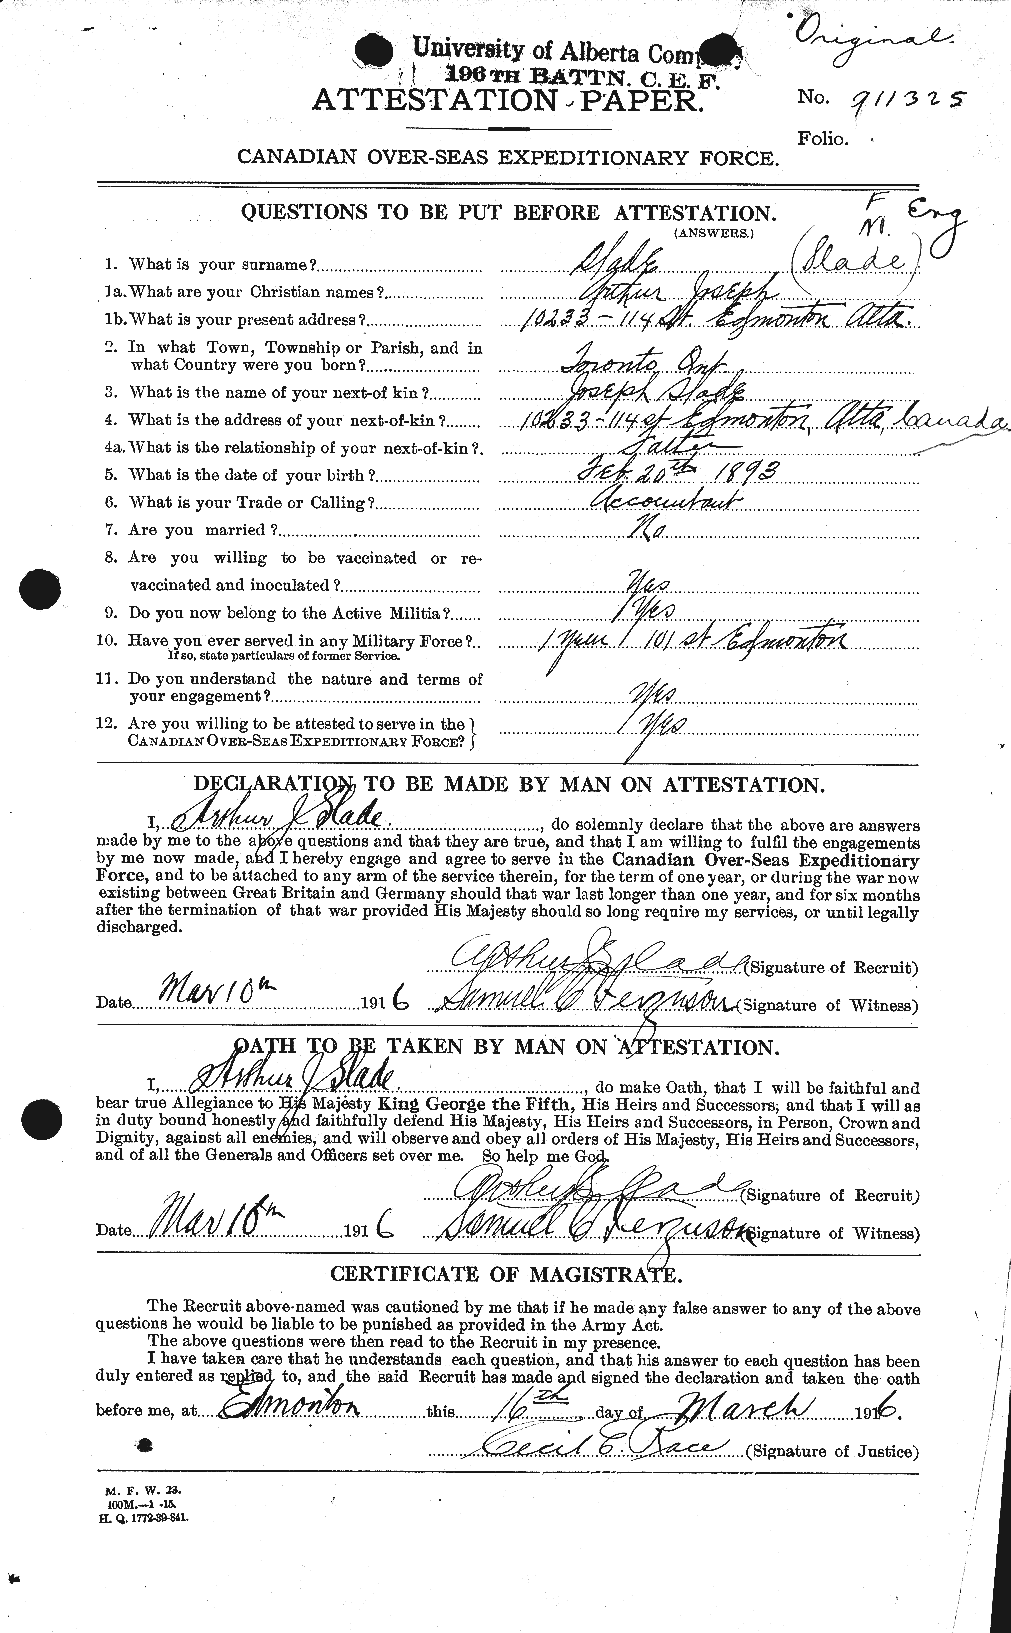 Personnel Records of the First World War - CEF 103820a